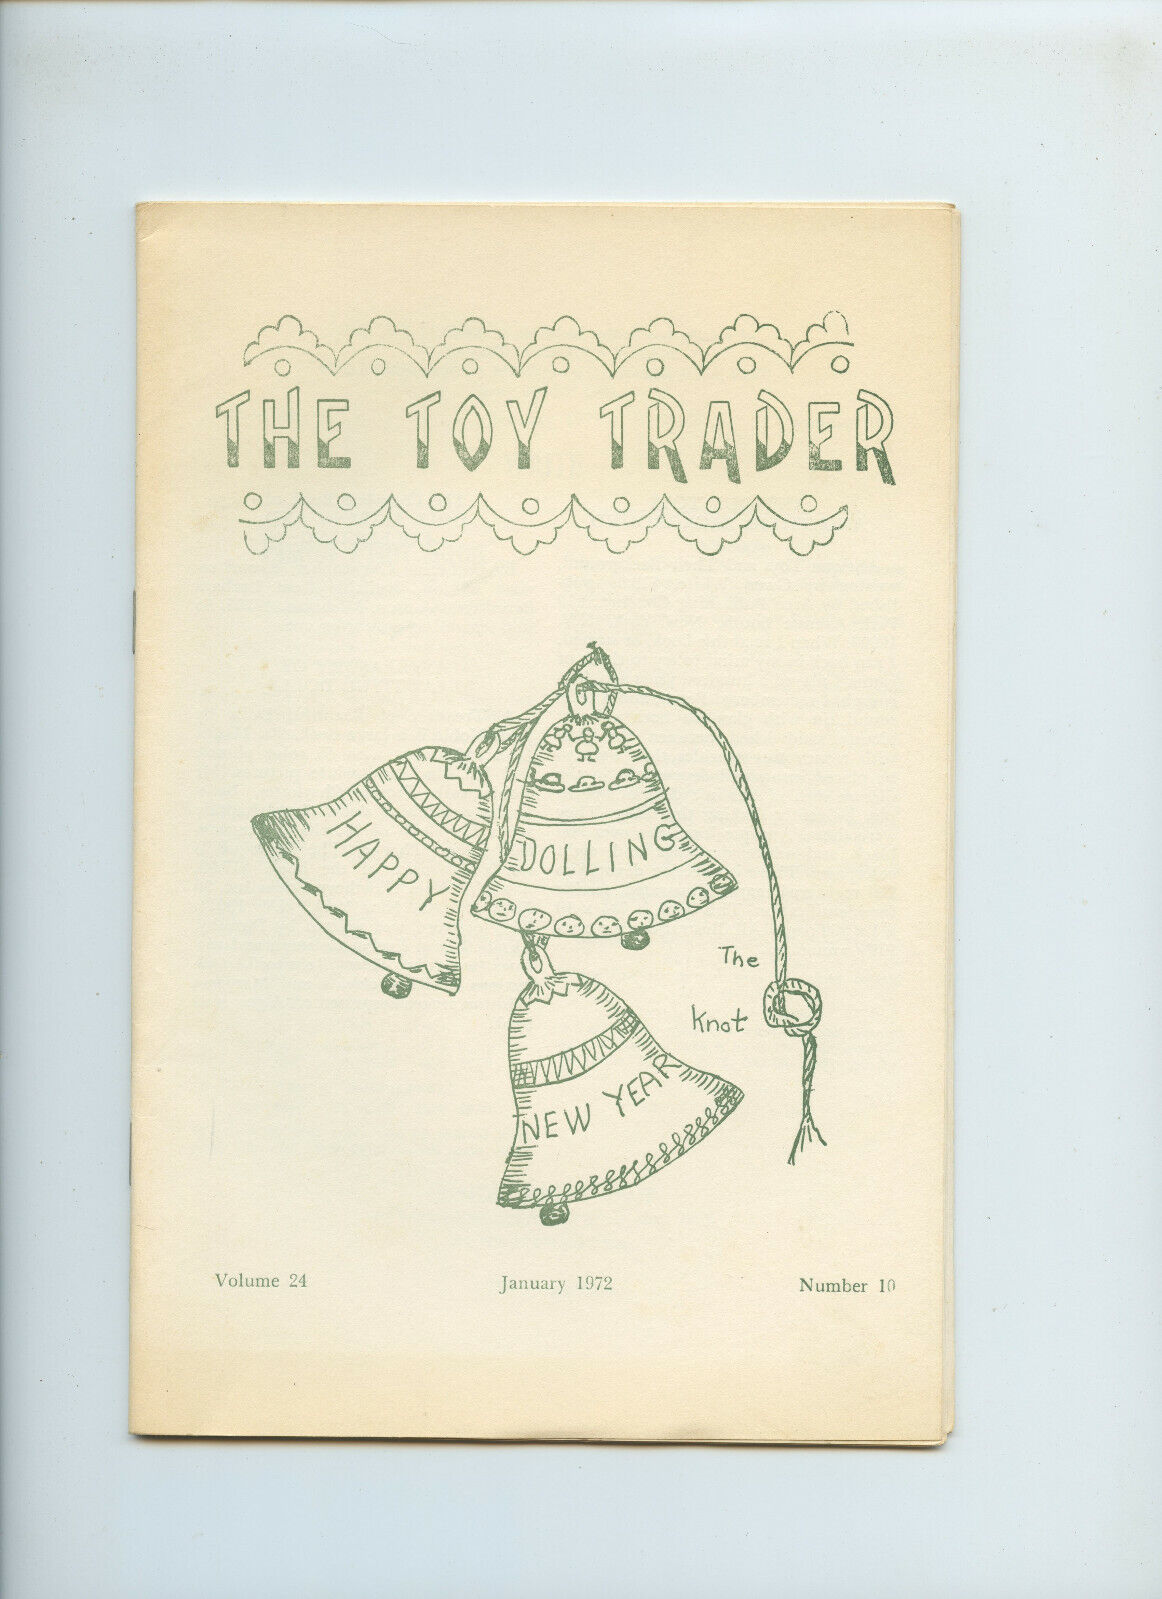 January 1972 The Toy Trader Magazine Photo Poster paintings President John Adams Classified Ads